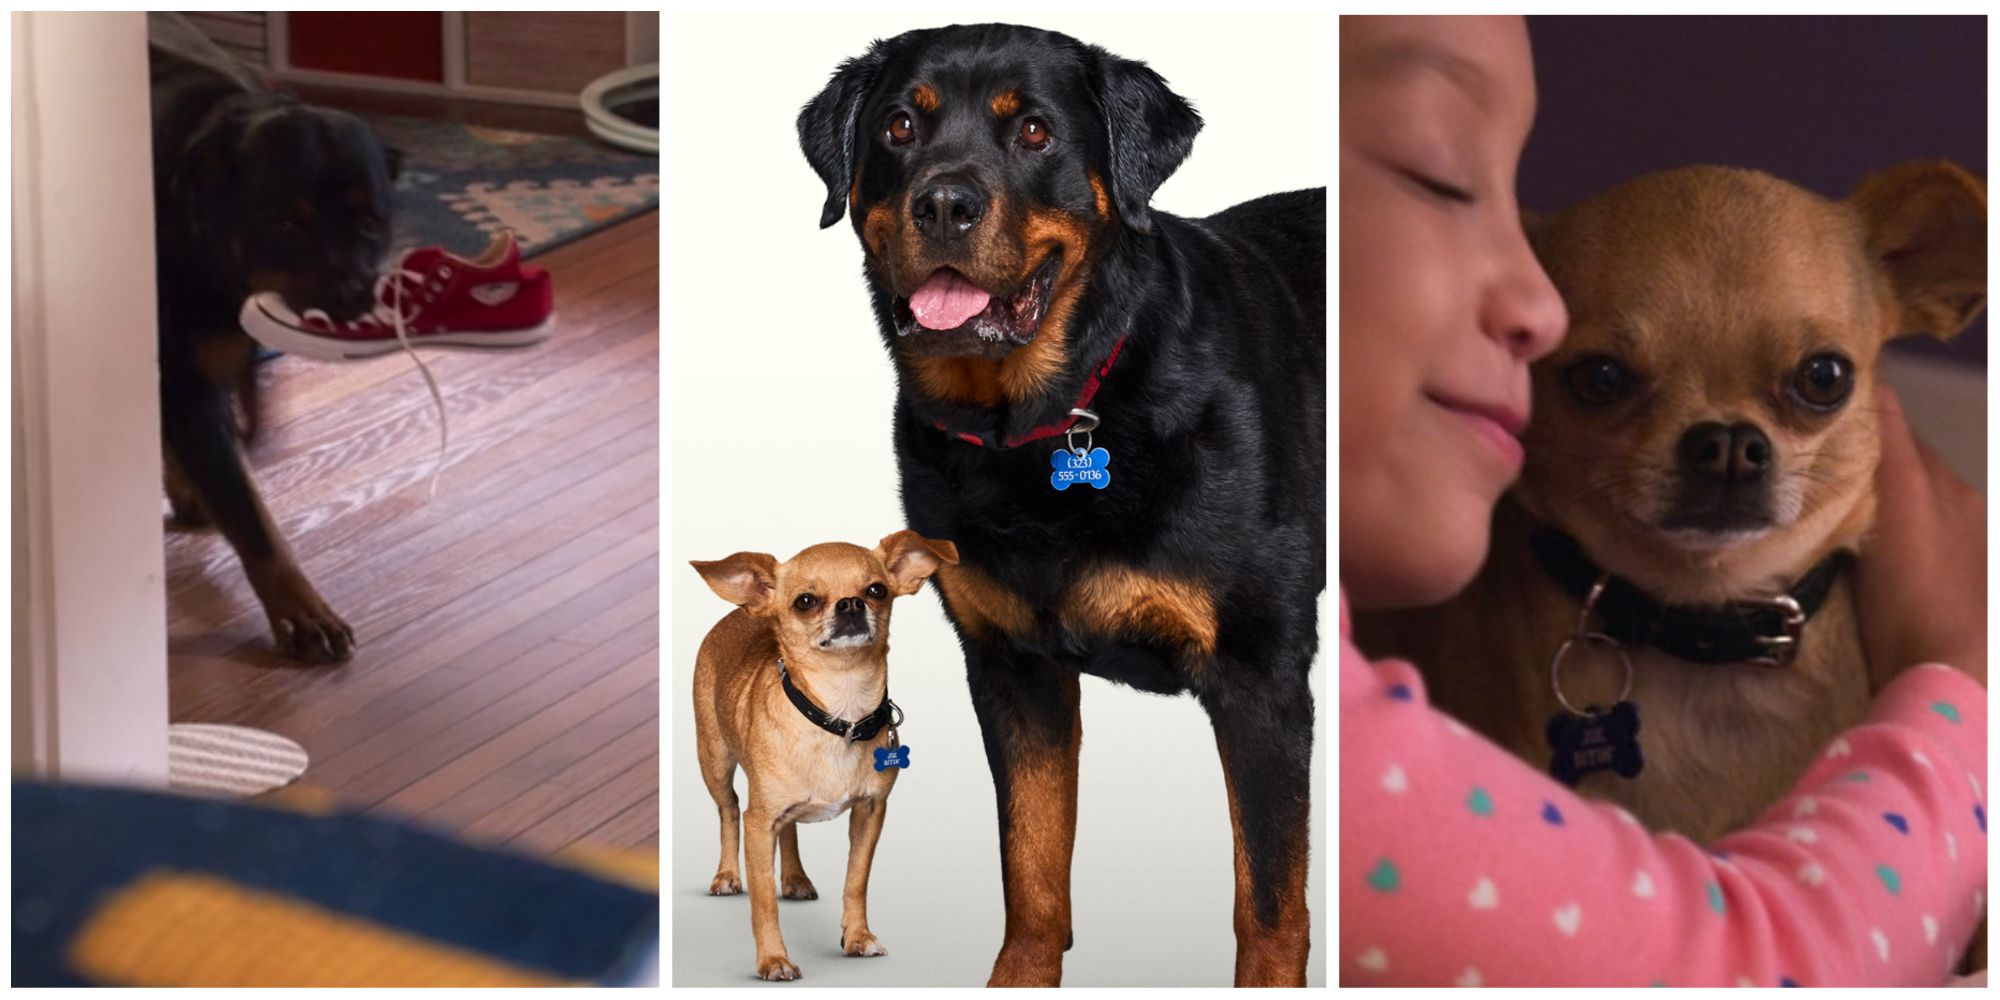 Cheaper By The Dozen 2022 chihuahua and rottweiler